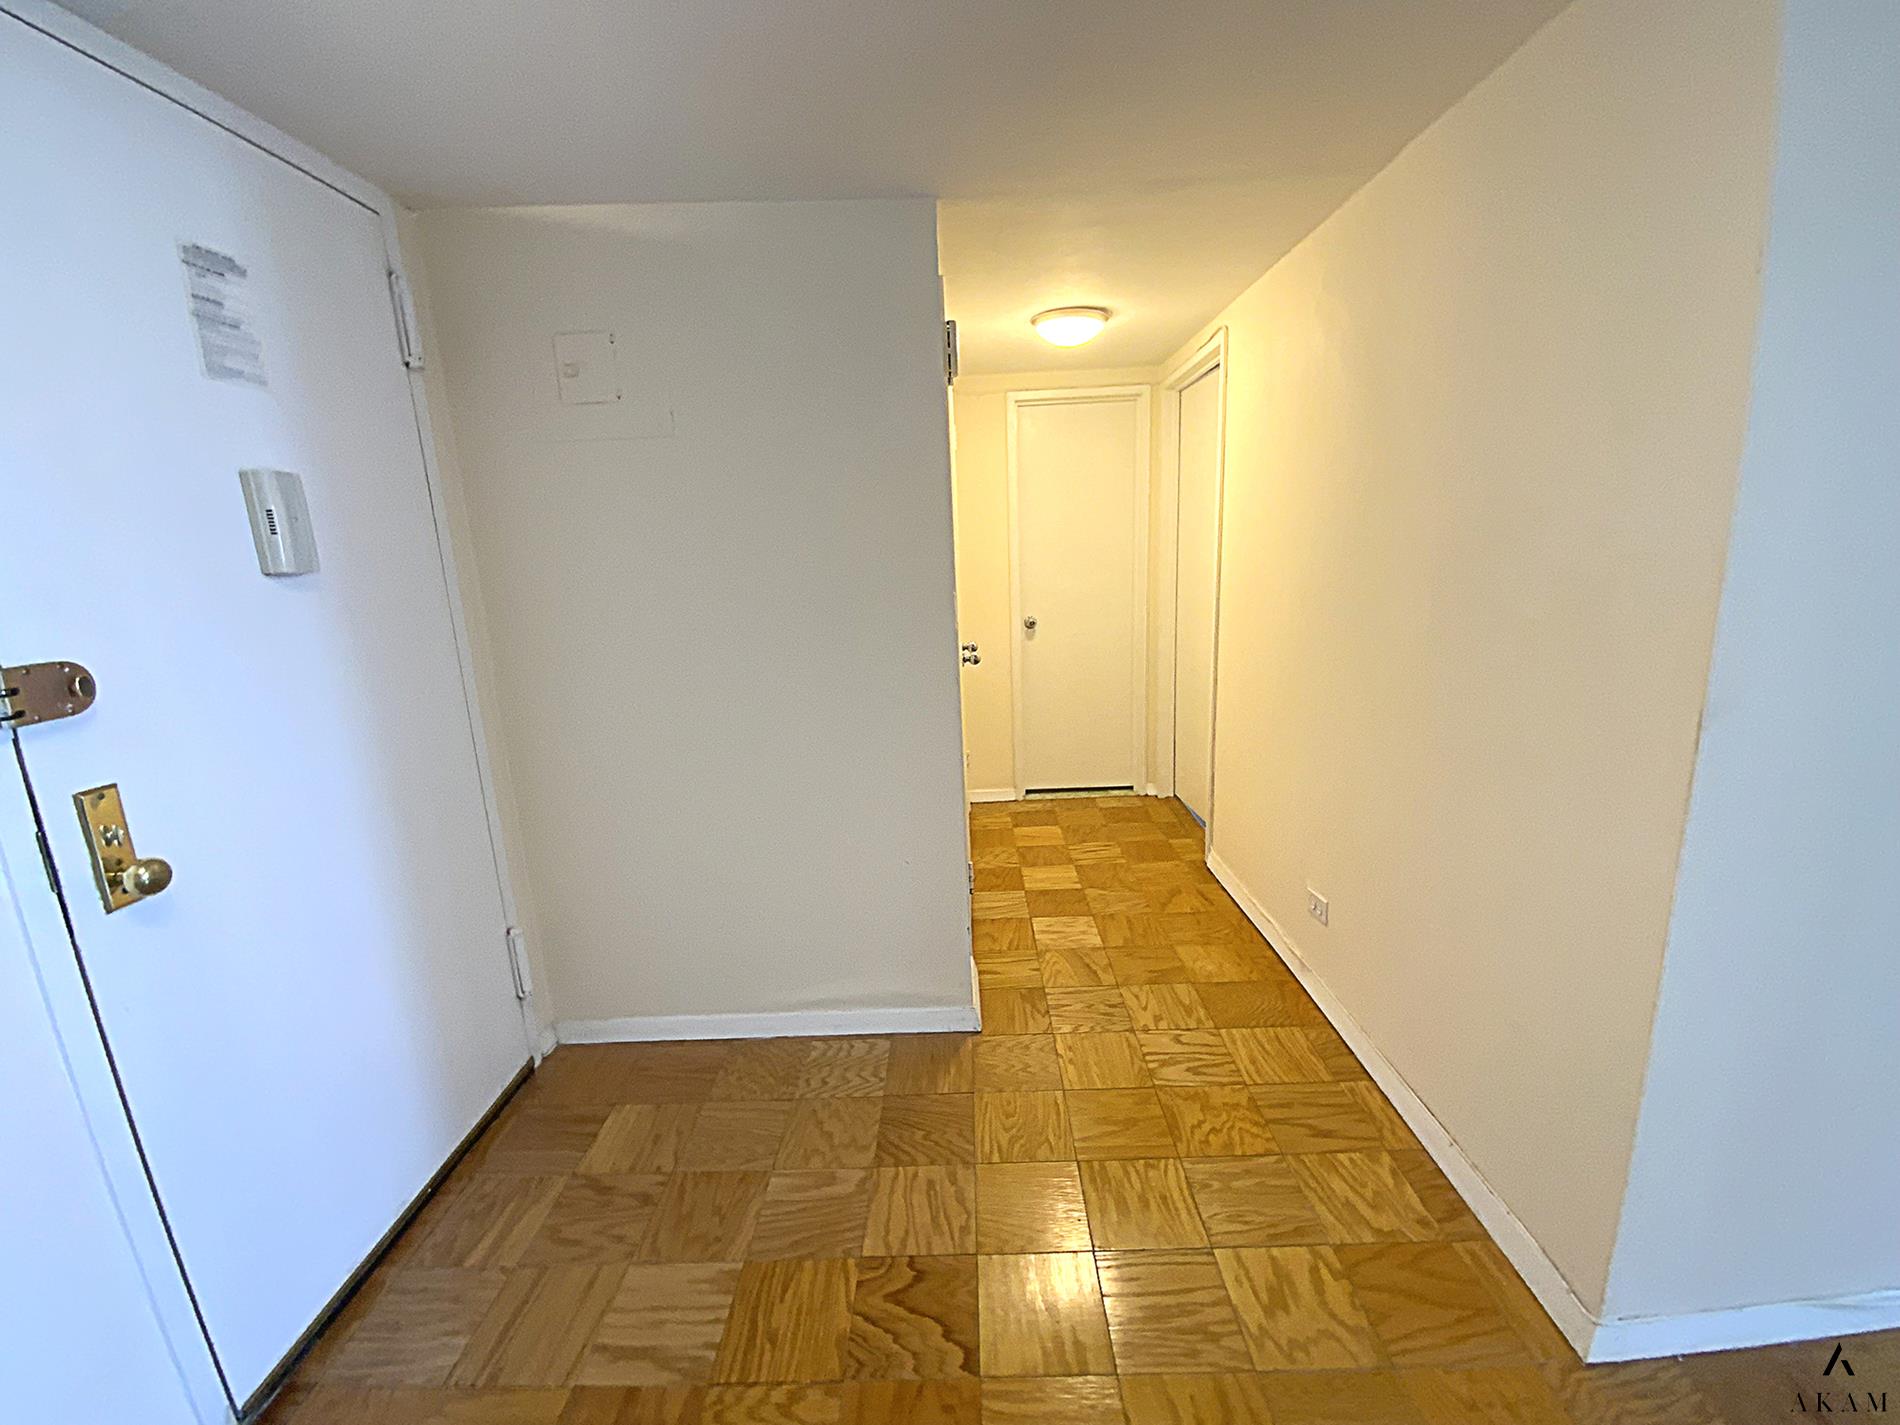 a view of hallway with wooden floor